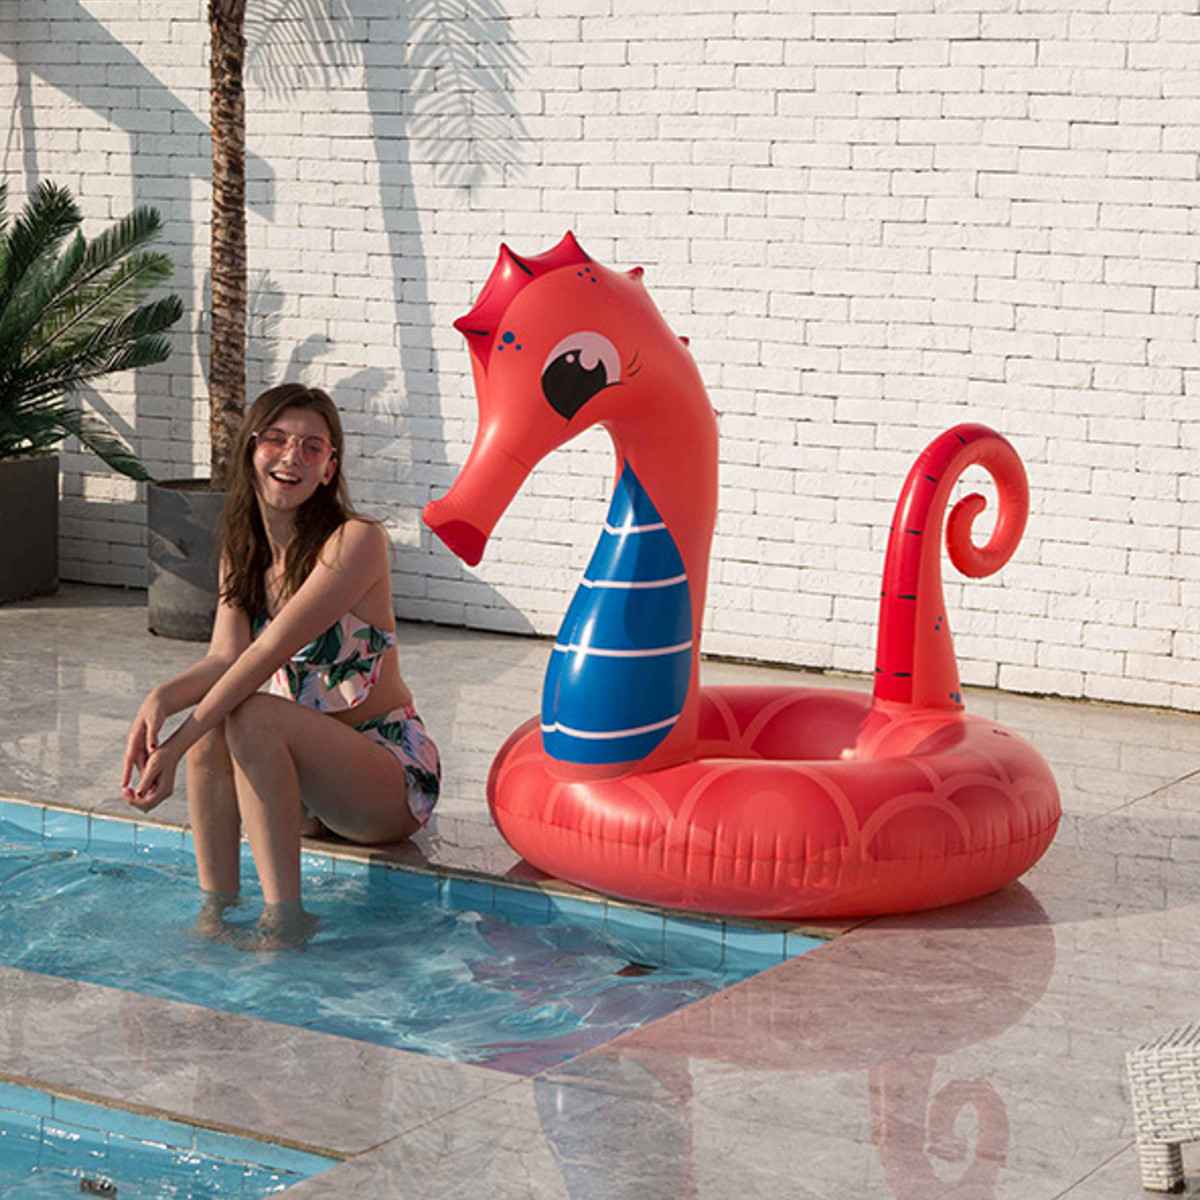 Large-Seahorse-Inflatable-Hippocampus-Giant-Swimming-Pool-Ring-Floats-Bed-Water-Pool-Raft-Camping-Be-1723619-11